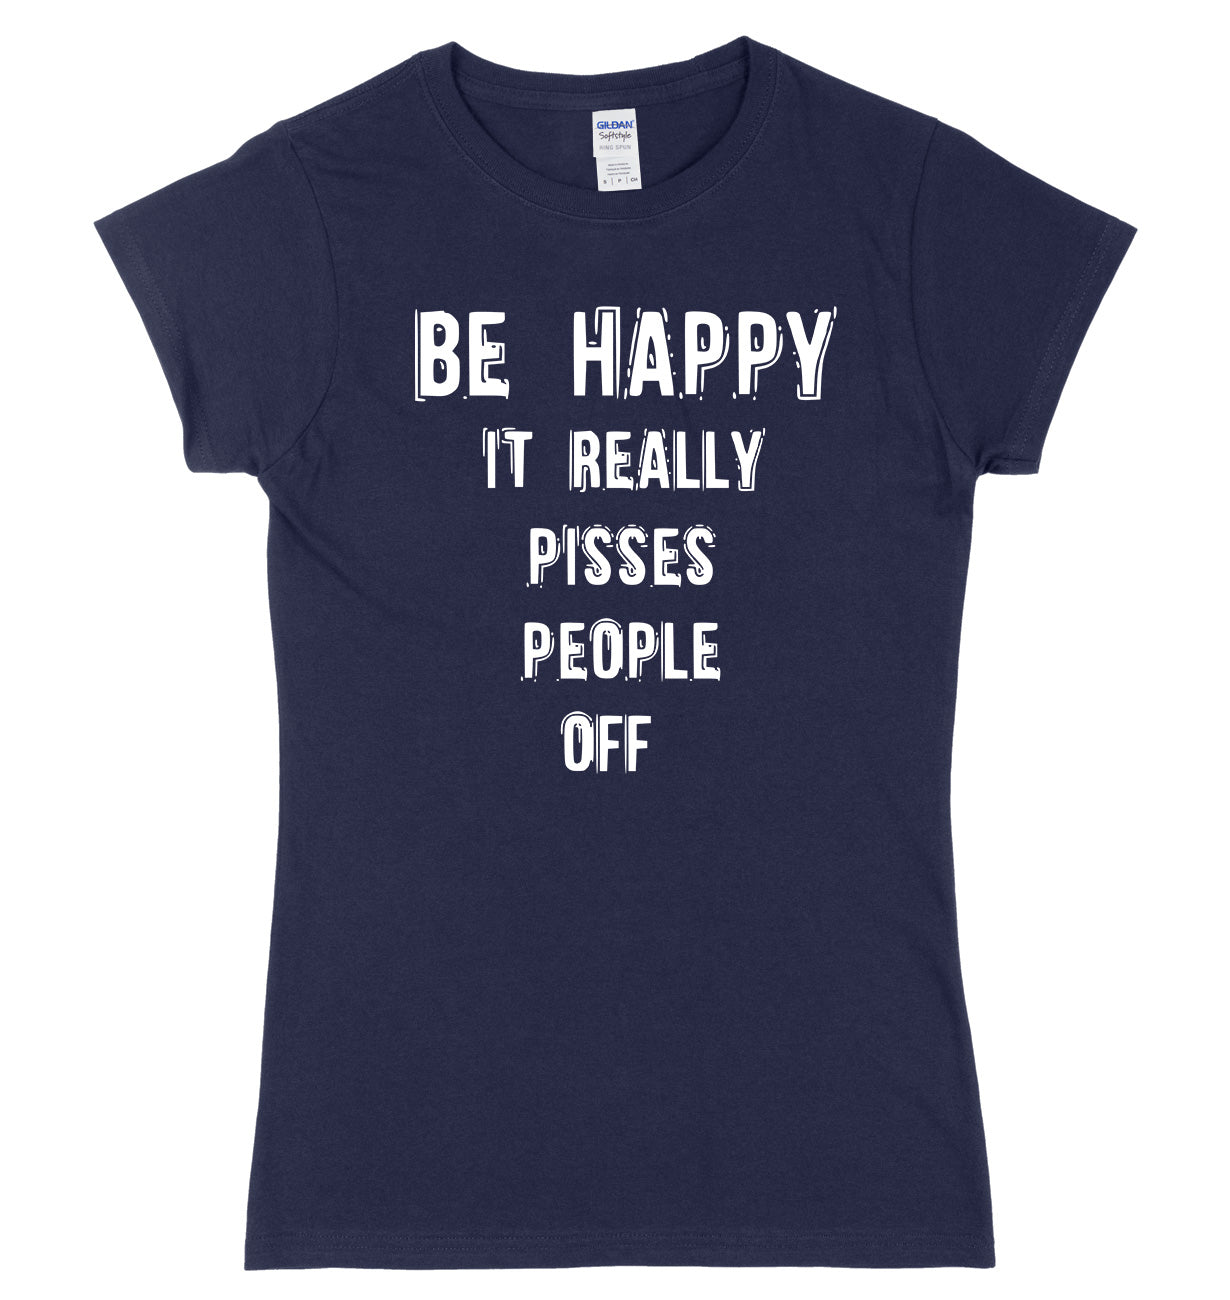 Be Happy It Really Pisses People Off Womens Ladies Slim Fit T-Shirt